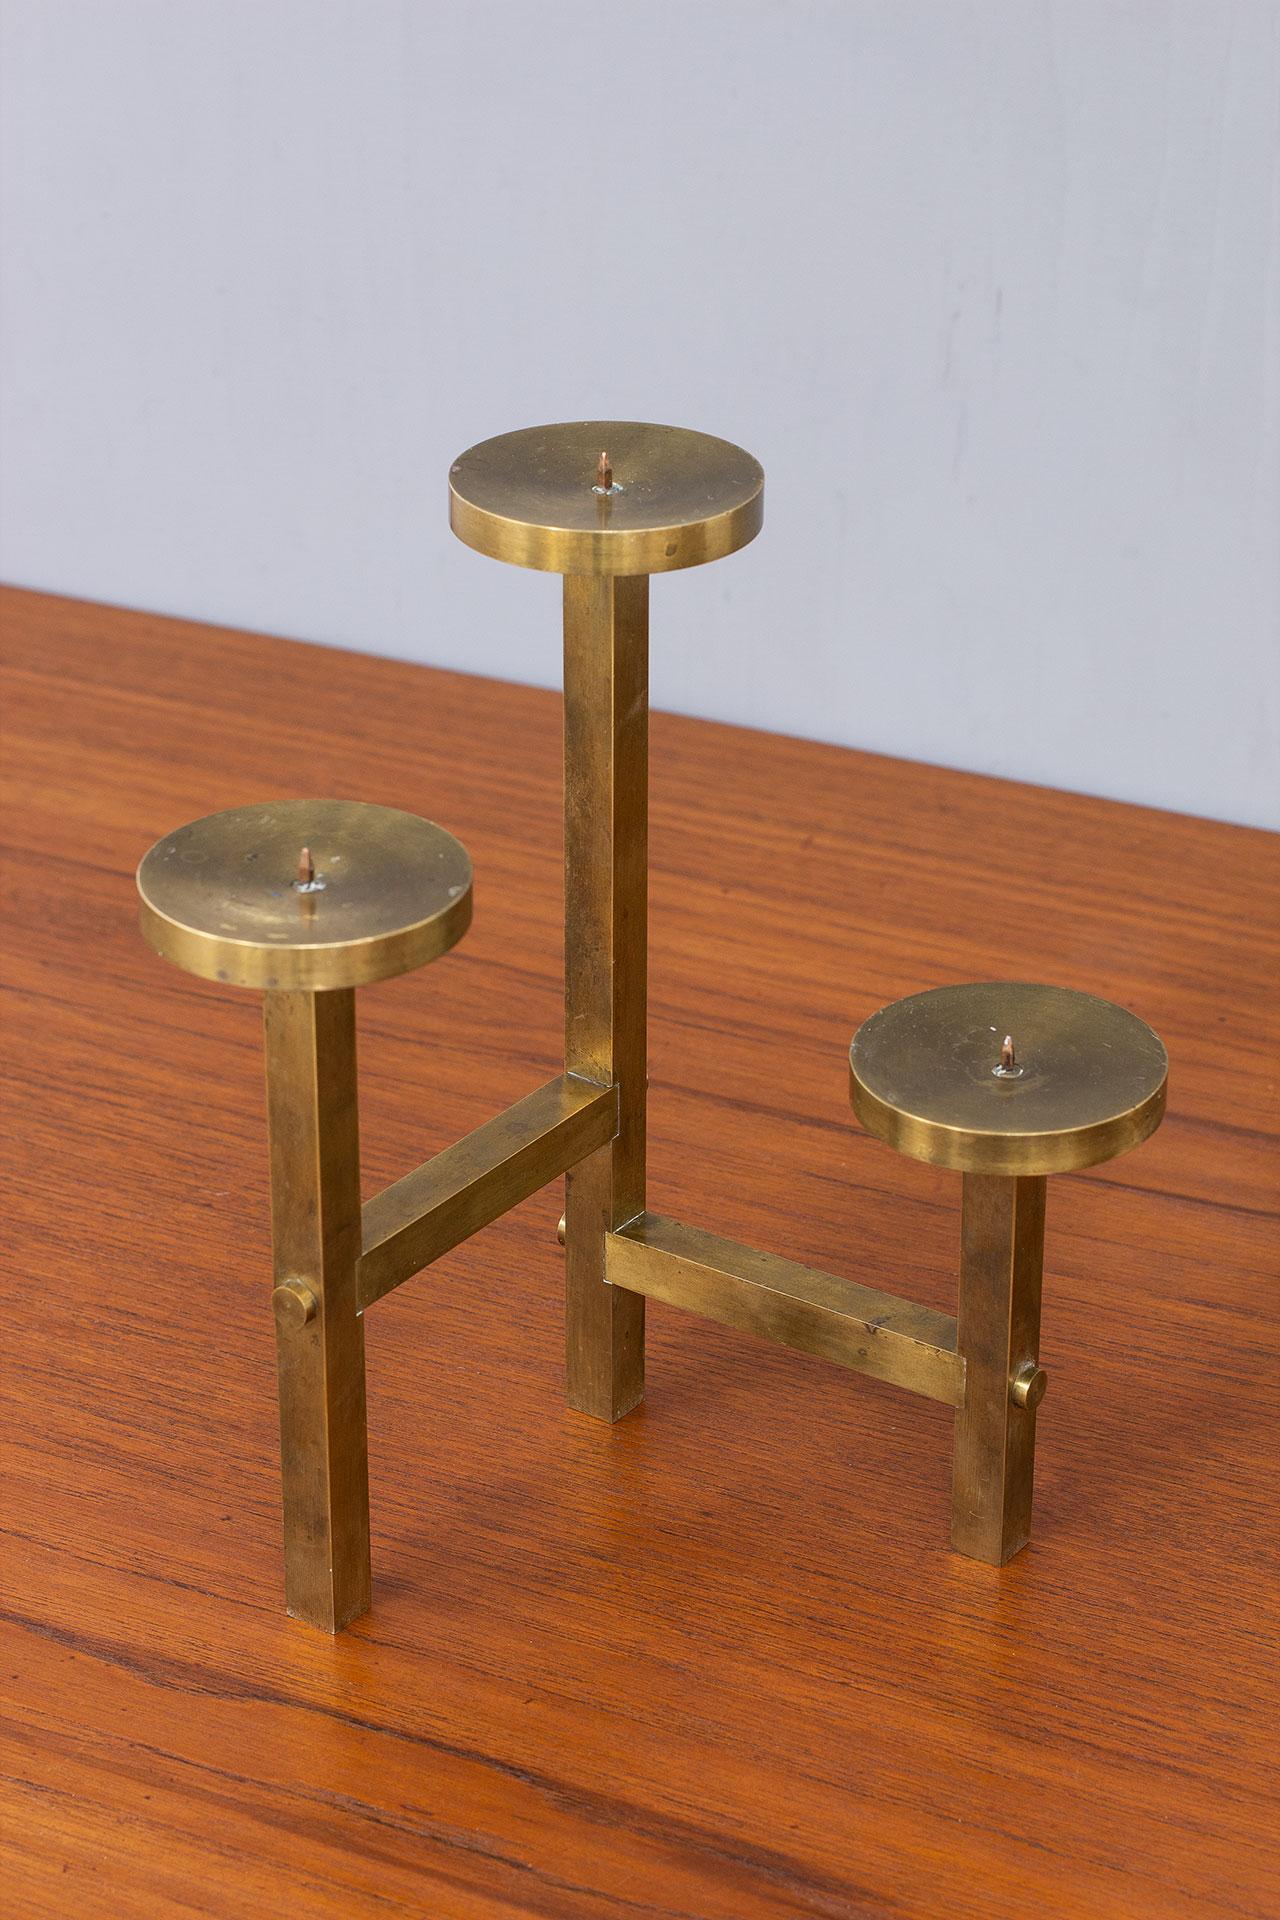 Beautiful tripod brass candelabra from unknown maker.  Most likely manufactured in Sweden during the 1980s. 
Suitable for wide candles: Ø up to 7cm

Dimensions: H 24 x W 18 x D 18cm

Condition is very good with lovely patina.